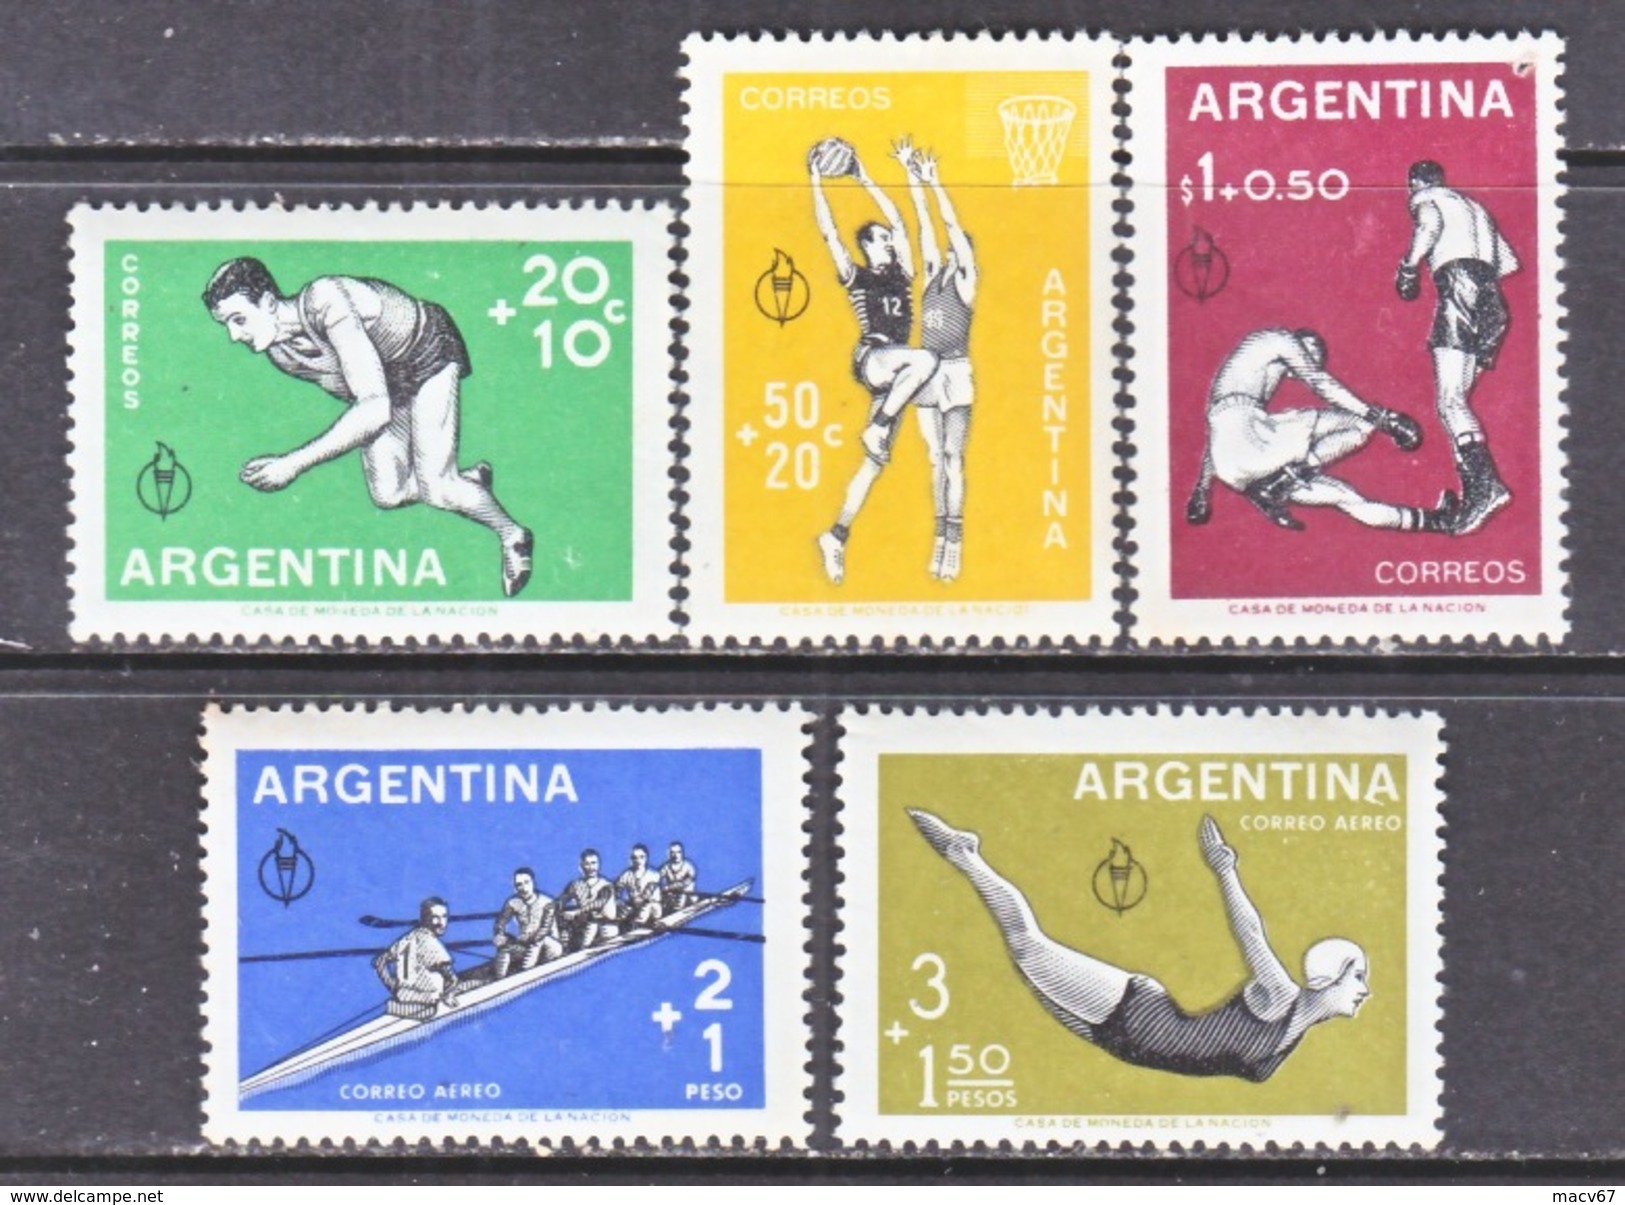 Argentina  B 19-21, CB 15-16  **   SPORTS  PAN-AM  GAMES - Unused Stamps